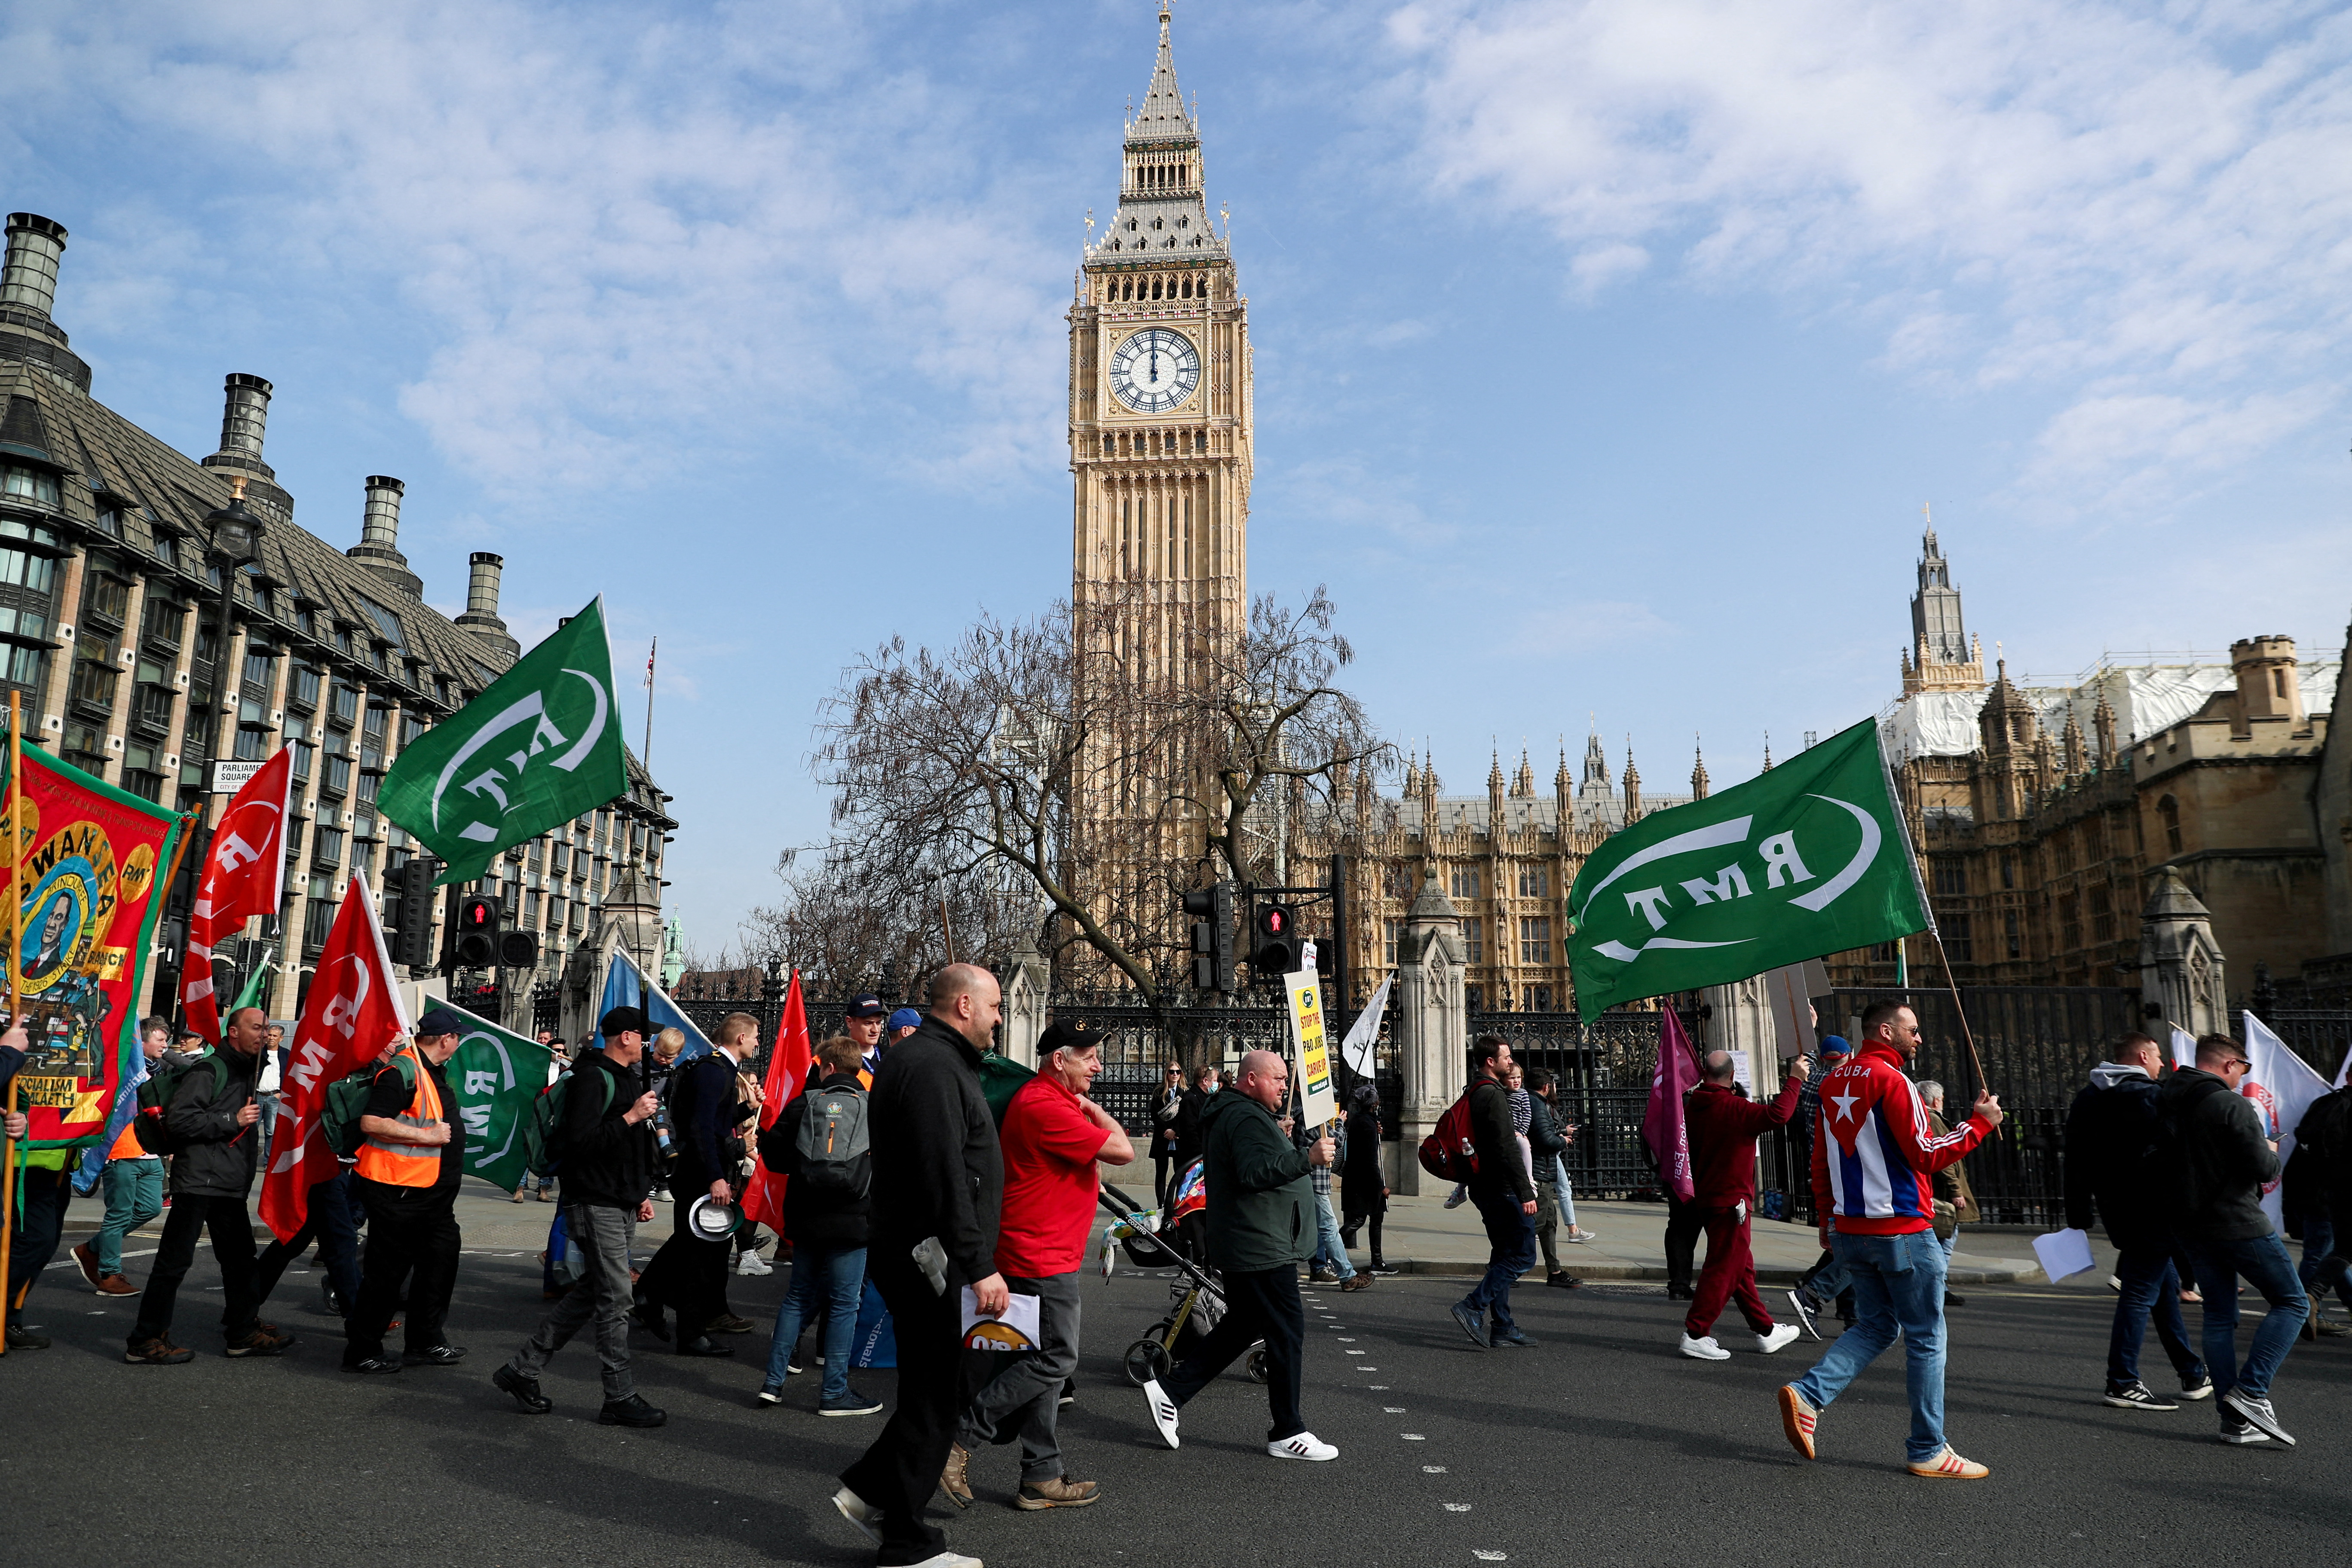 Protest over P&O Ferries' decision to fire hundreds of employees, in London